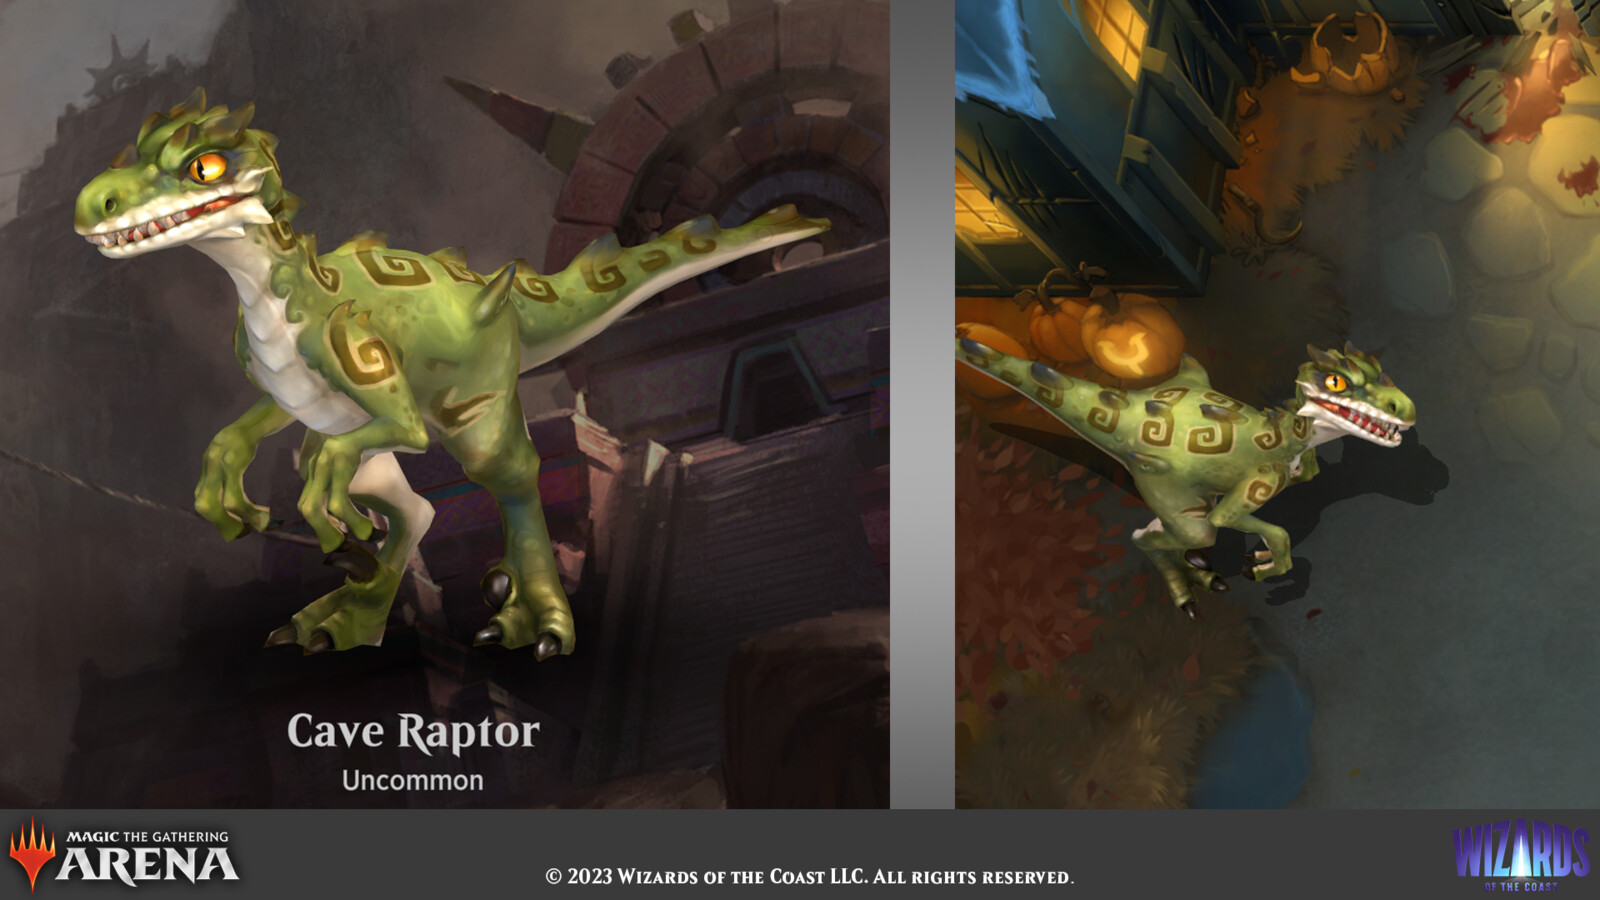 Select companion and game views for the Cave Raptor